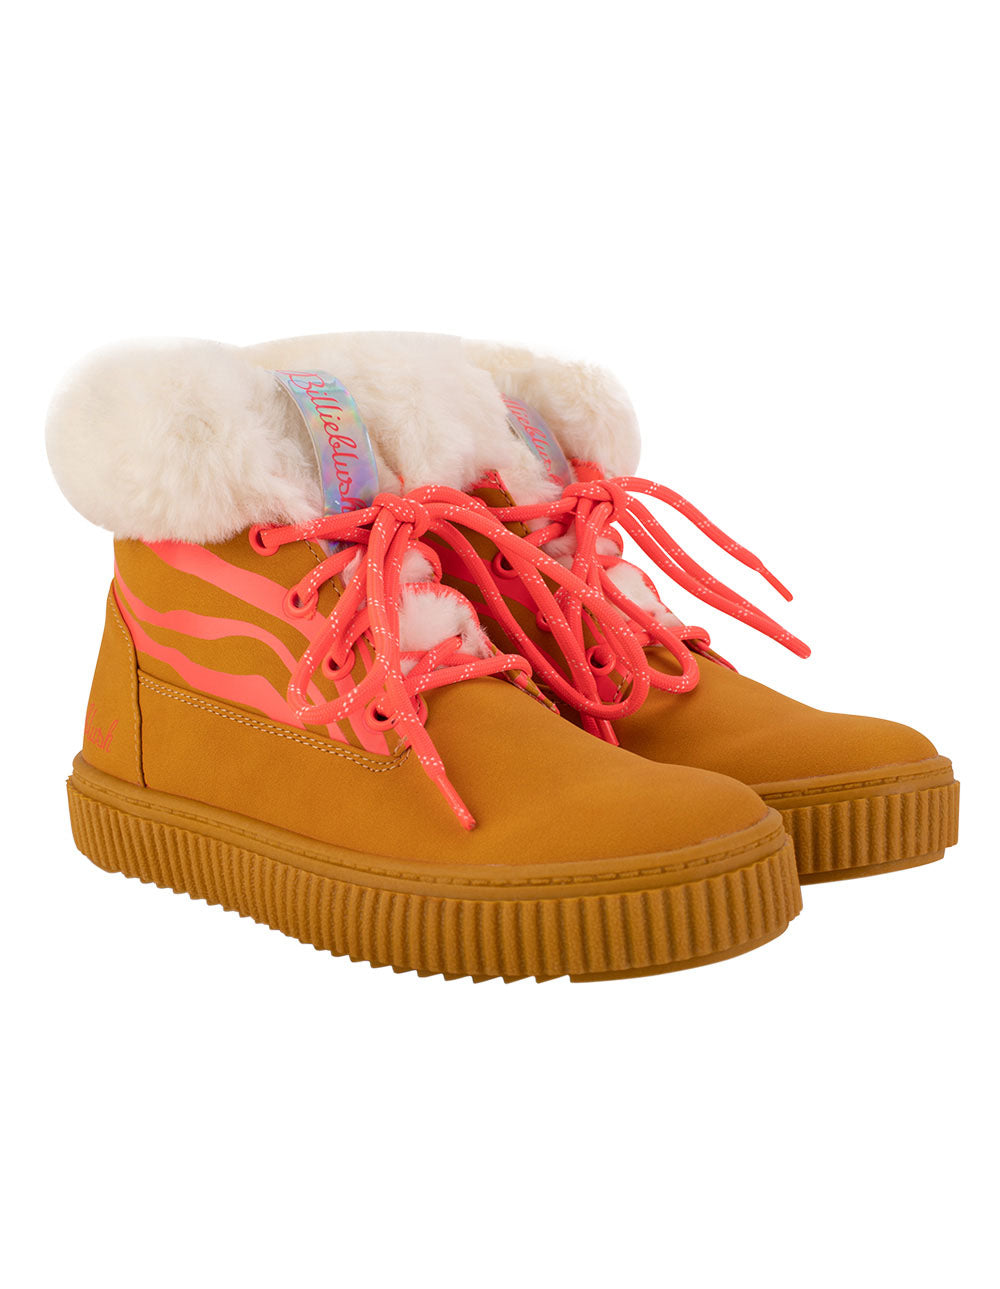 Mountain-Shearling-Boots-100319272BRN-Image-1